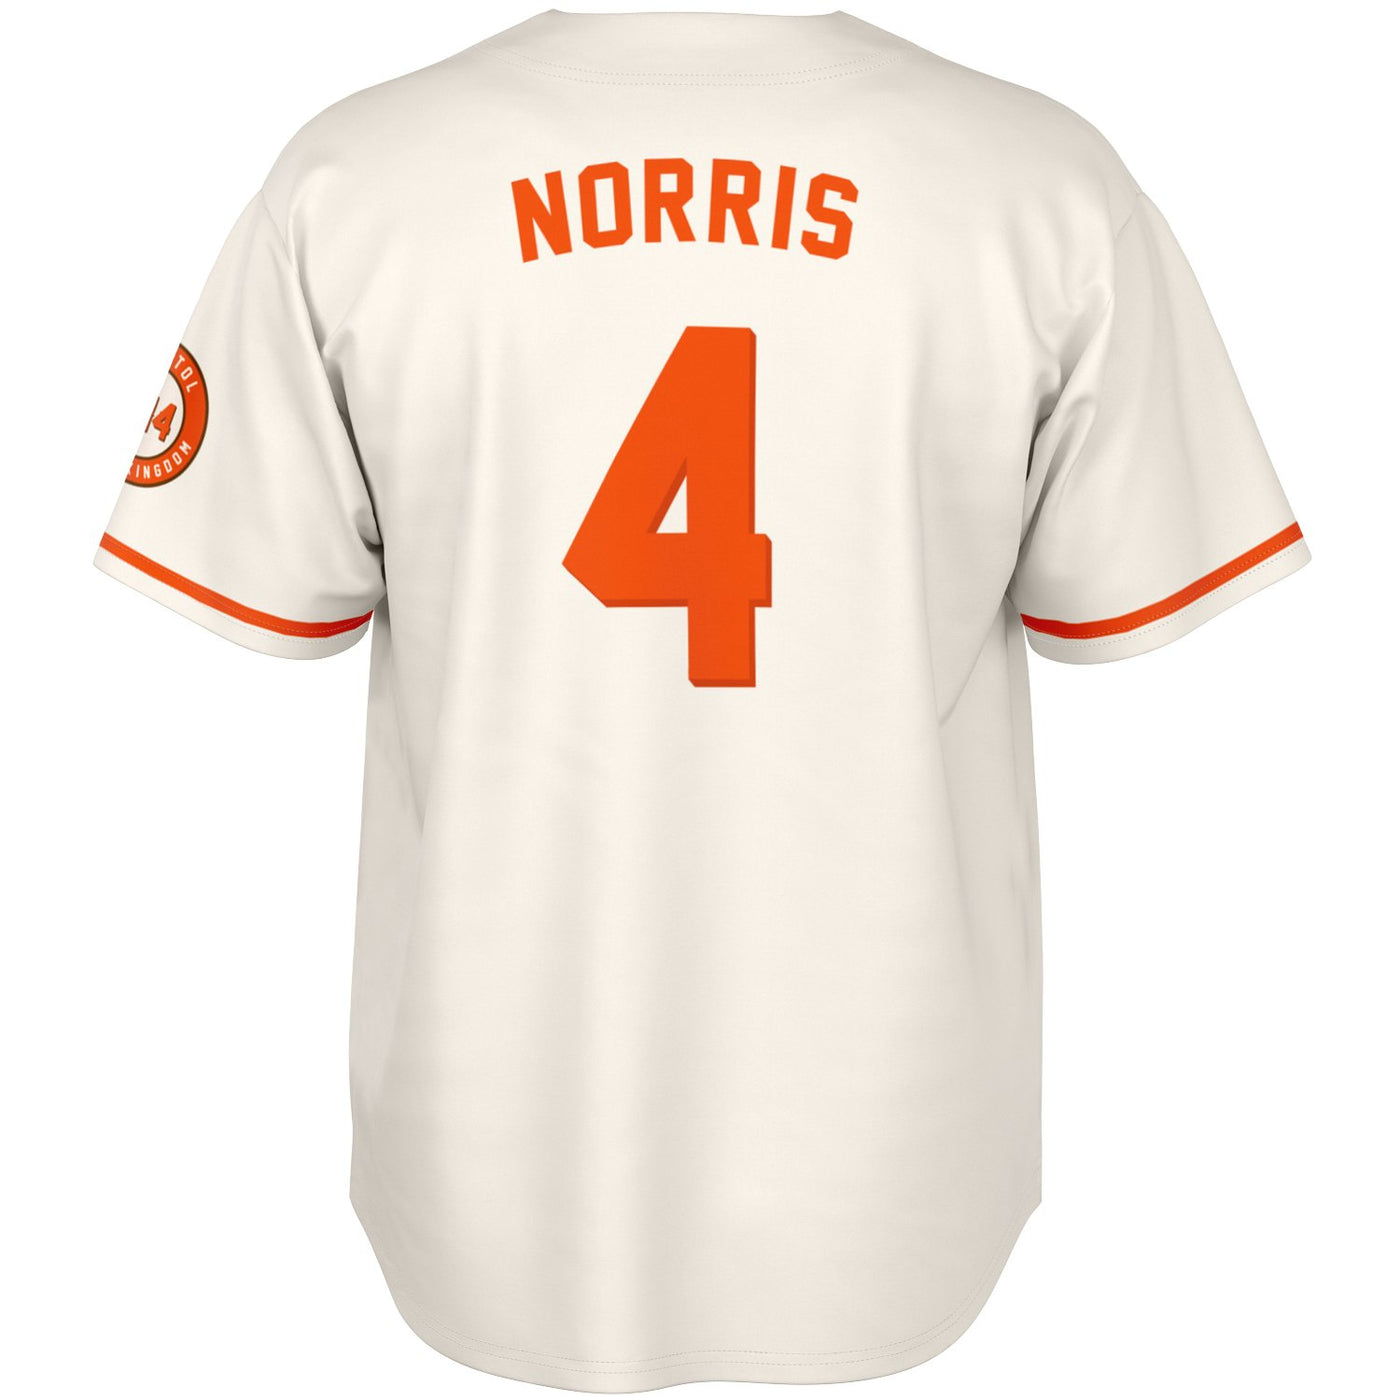 Norris - Off-White Creamsicle Jersey - Furious Motorsport